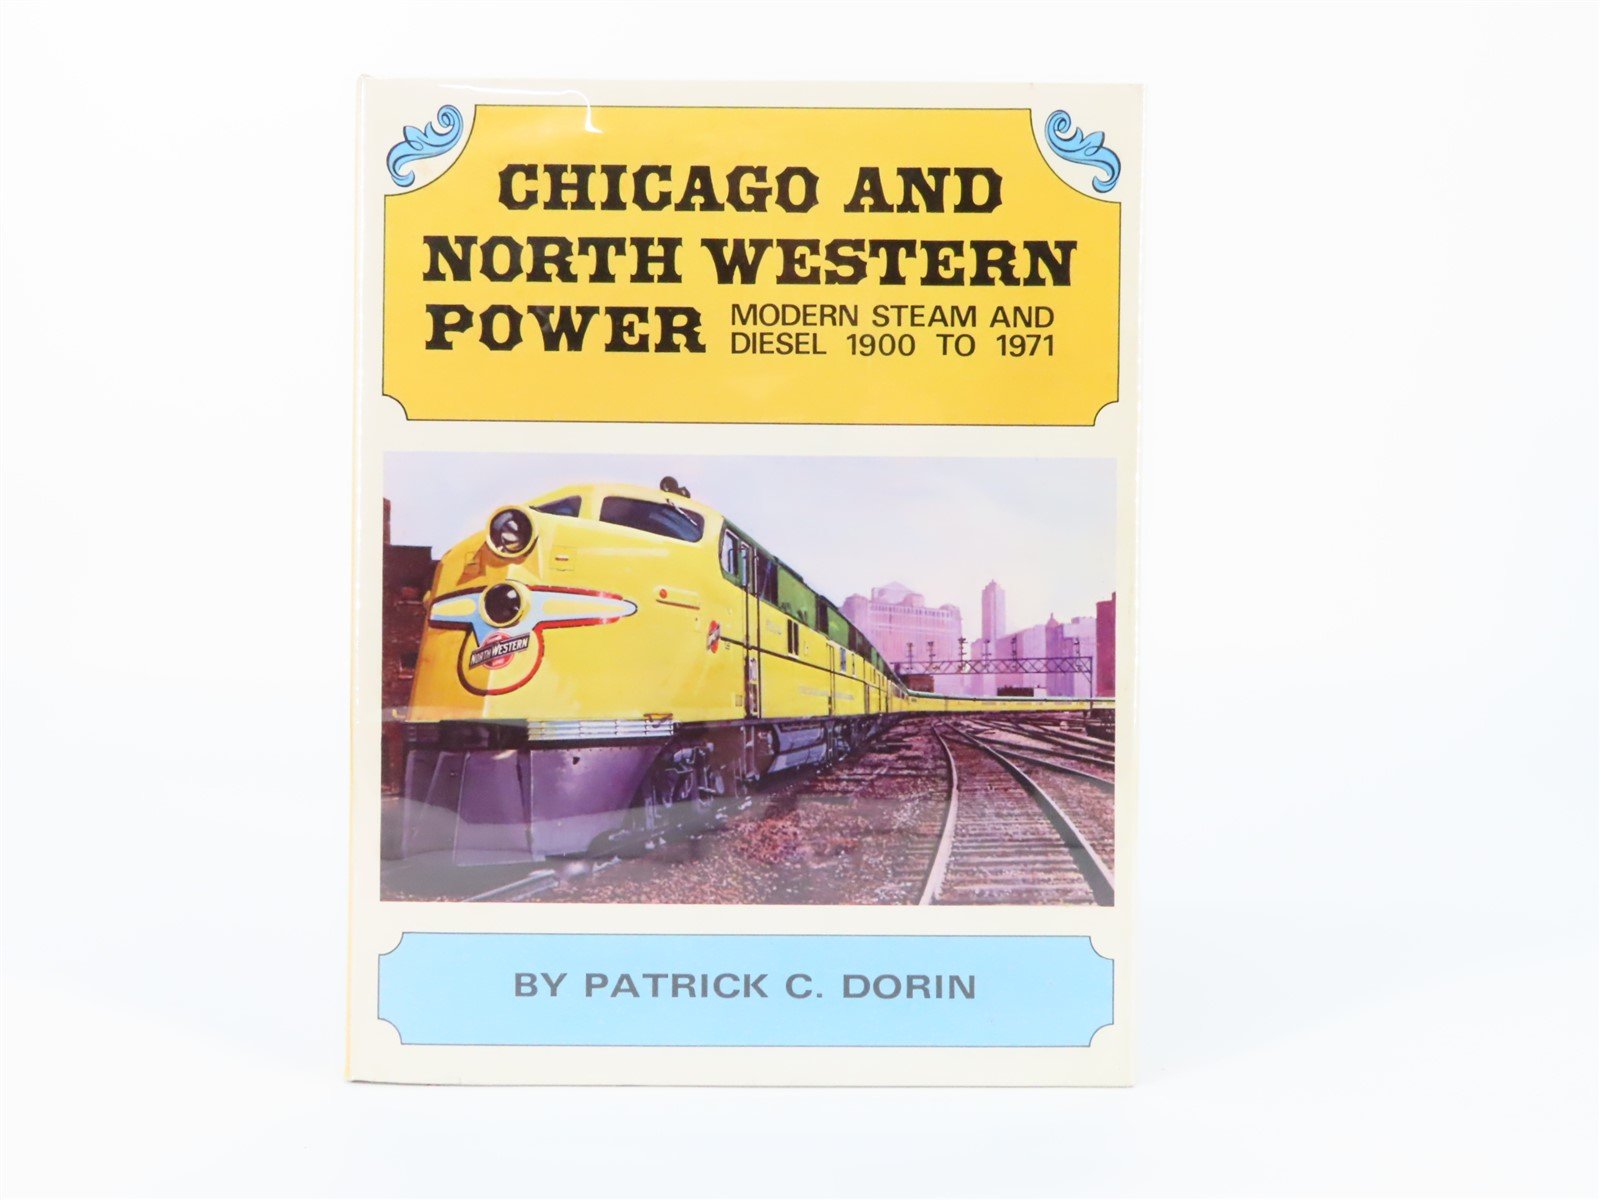 Chicago And North Western Power by Patrick C. Dorin ©1972 HC Book